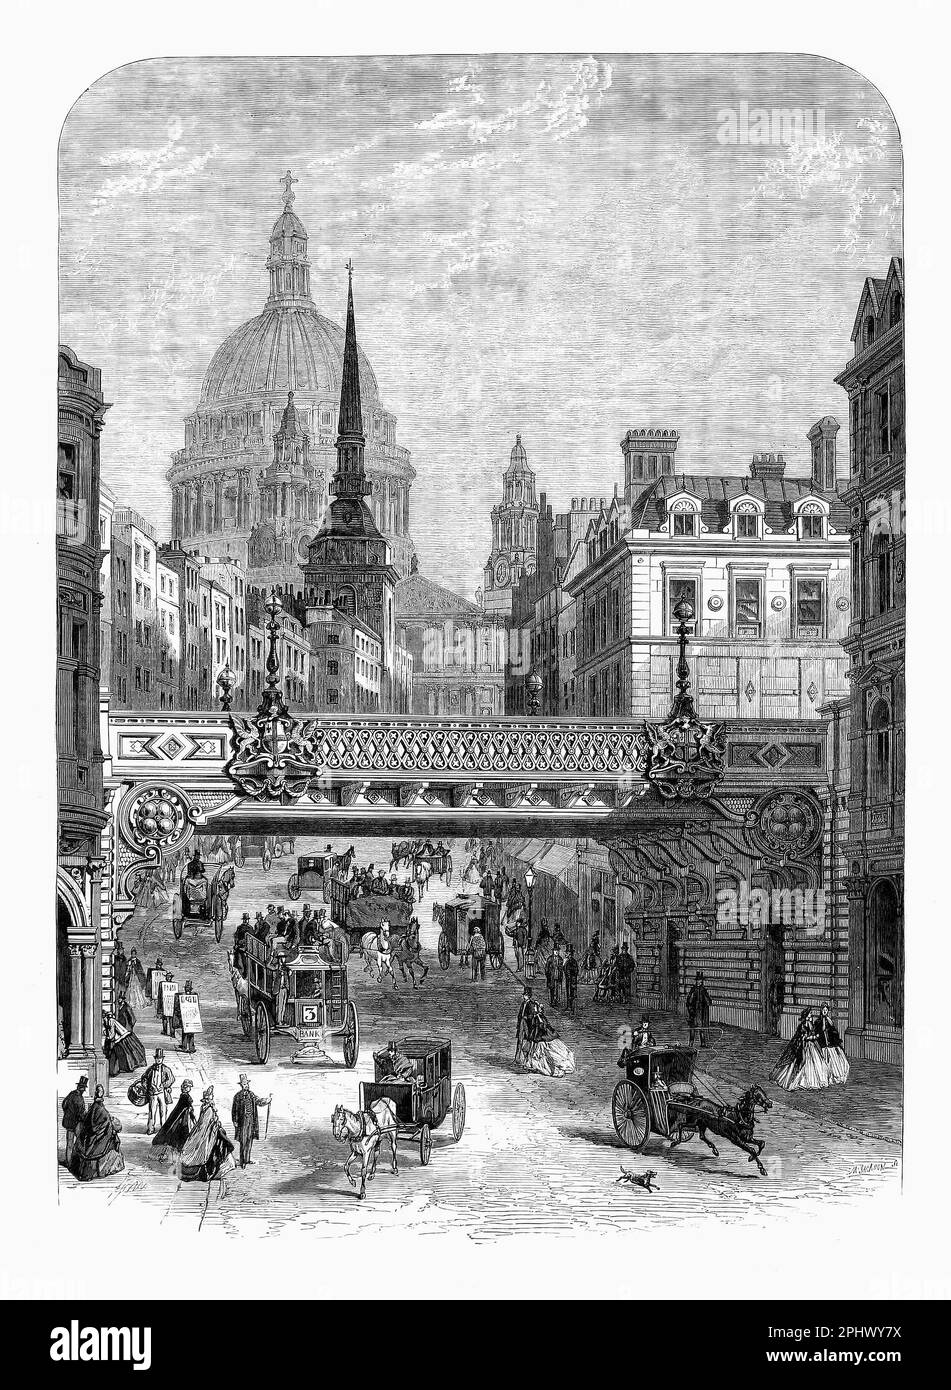 A gentile street scene from 1865 of the ornate Victorian railway bridge over Ludgate Hill in the City of London, England. It was built for use by the London, Chatham and Dover Railway Company Stock Photo